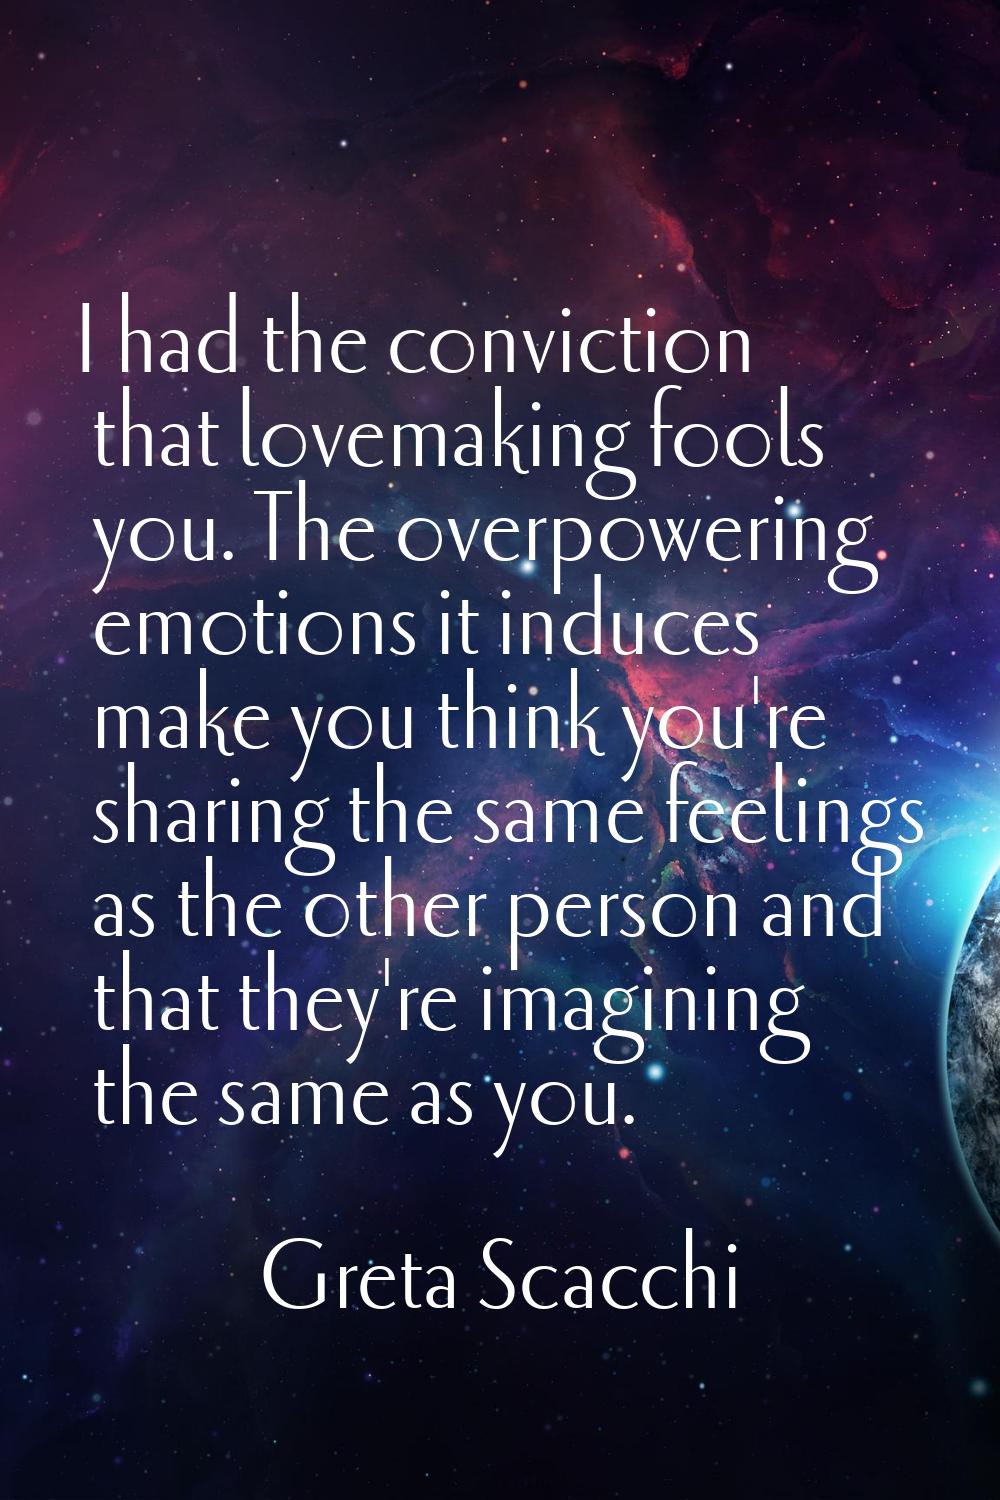 I had the conviction that lovemaking fools you. The overpowering emotions it induces make you think